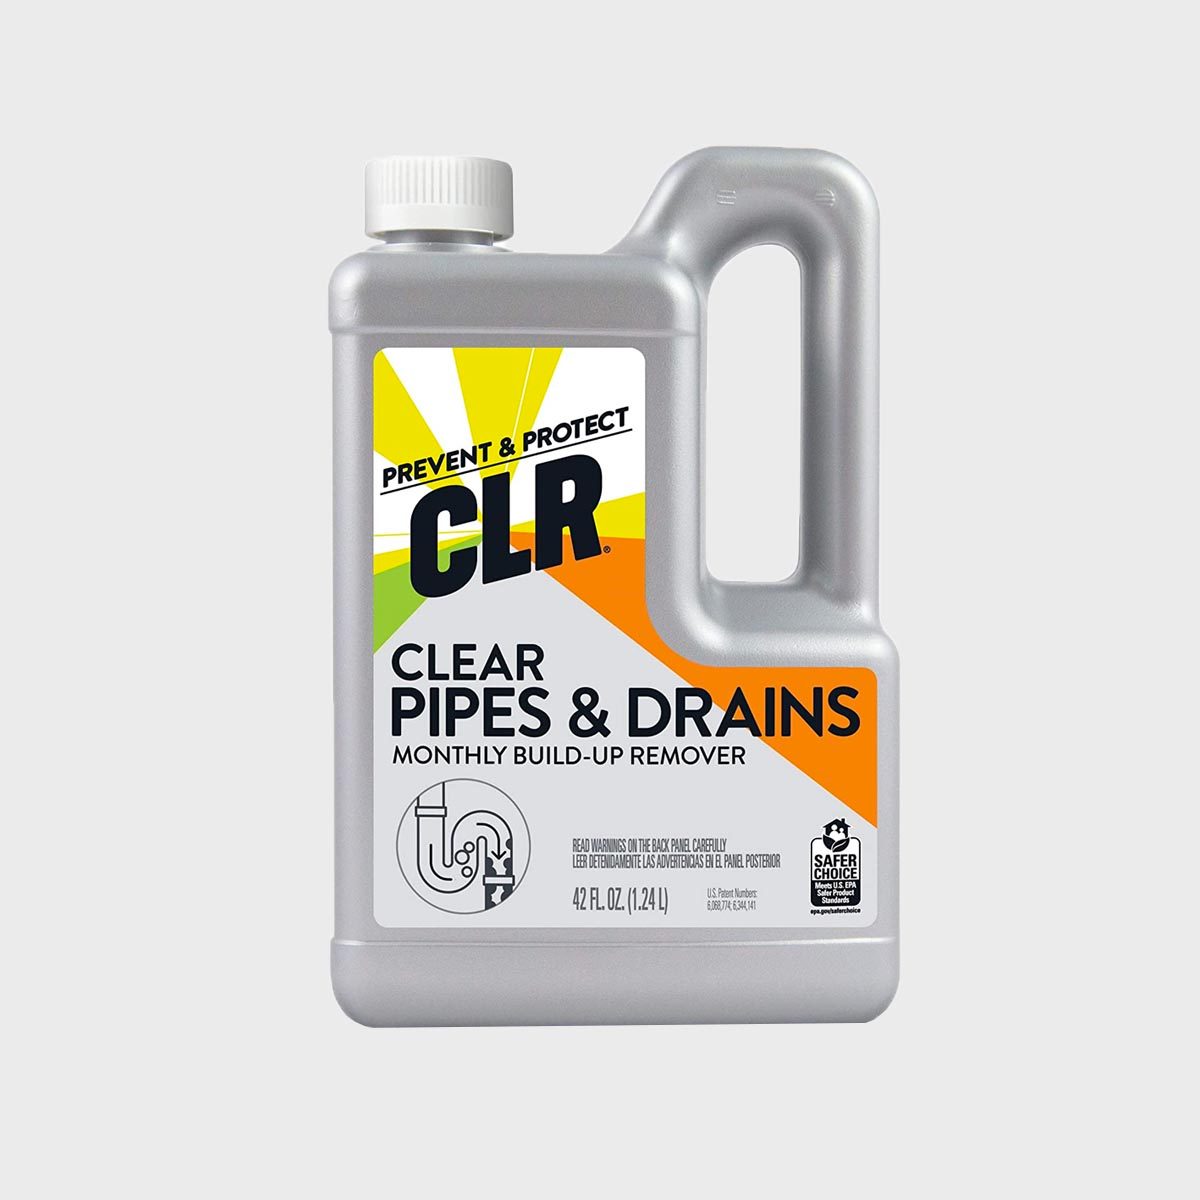 https://www.rd.com/wp-content/uploads/2021/11/CLR-Clear-Pipes-and-Drains-ecomm.jpg?fit=700%2C700